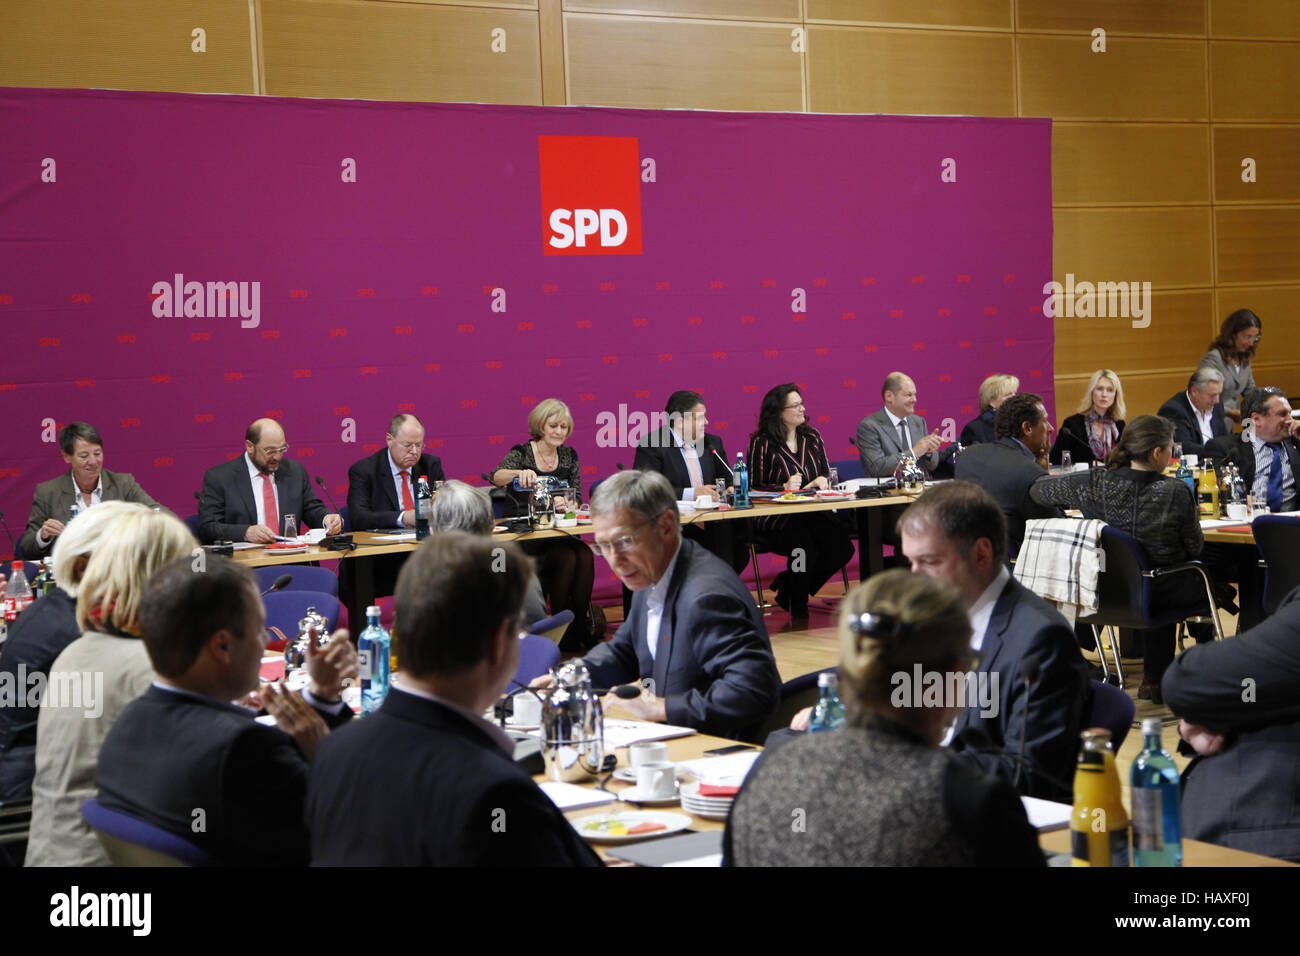 SPD party executive committee meeting Stock Photo